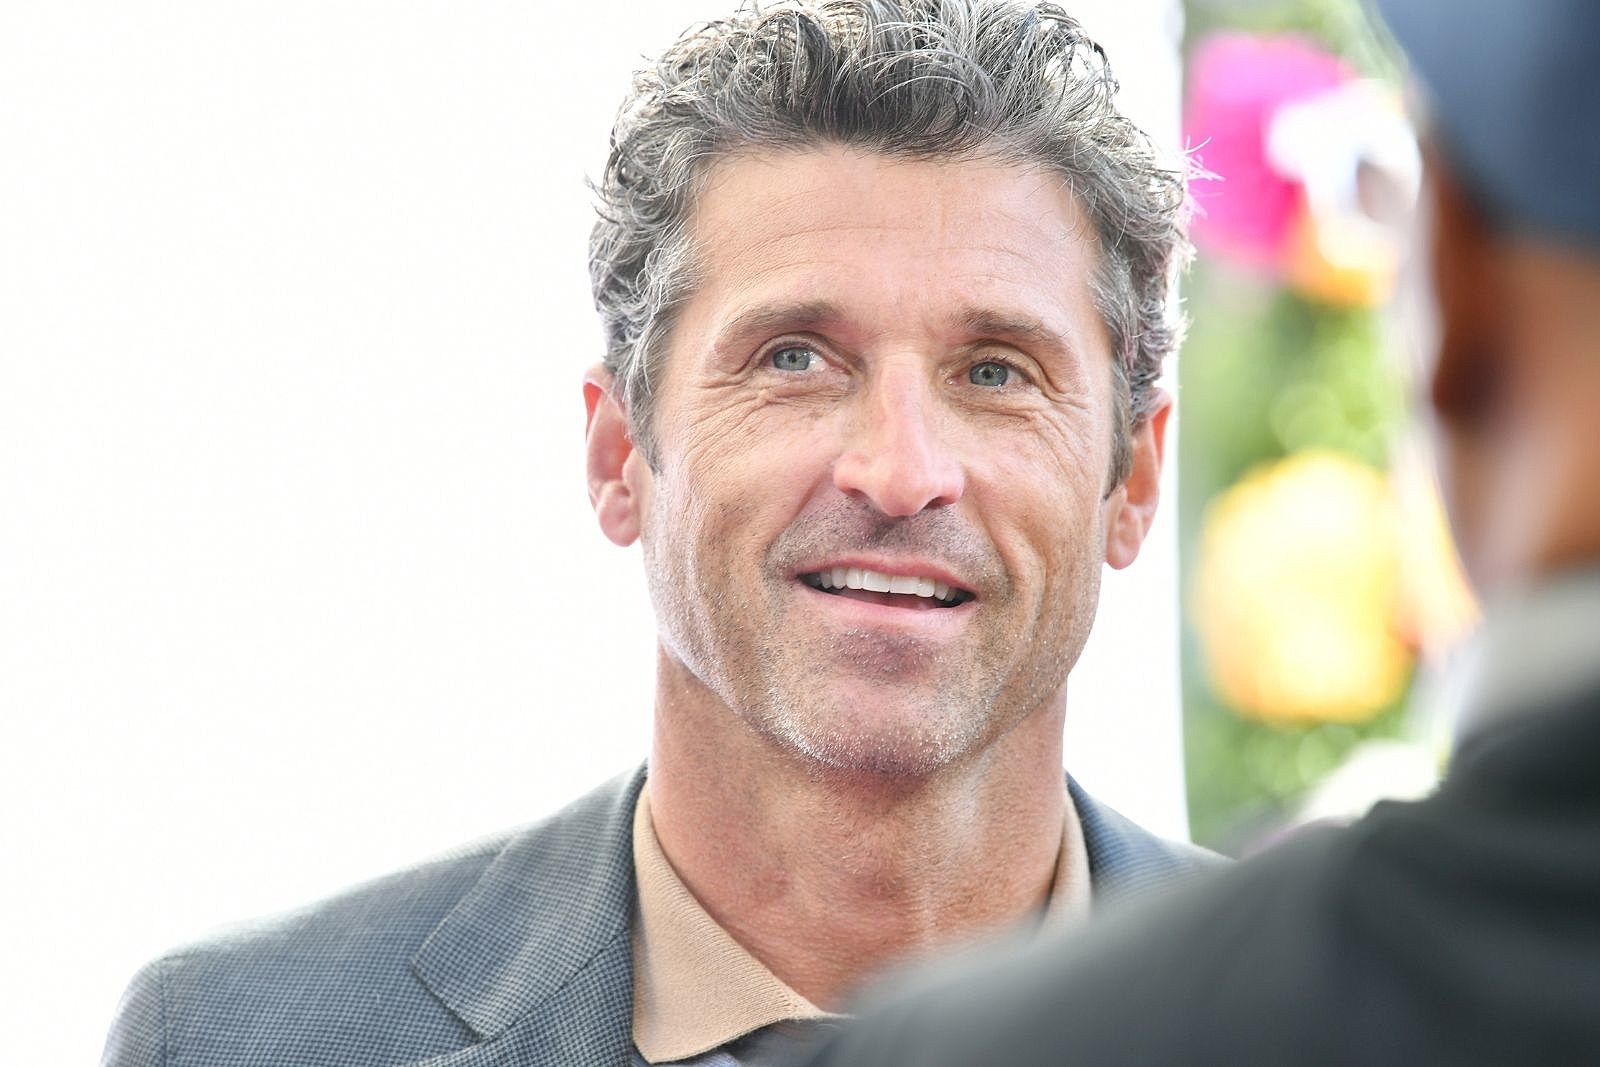 Will Mainer Patrick Dempsey Win Our Hearts Over With His Singing?